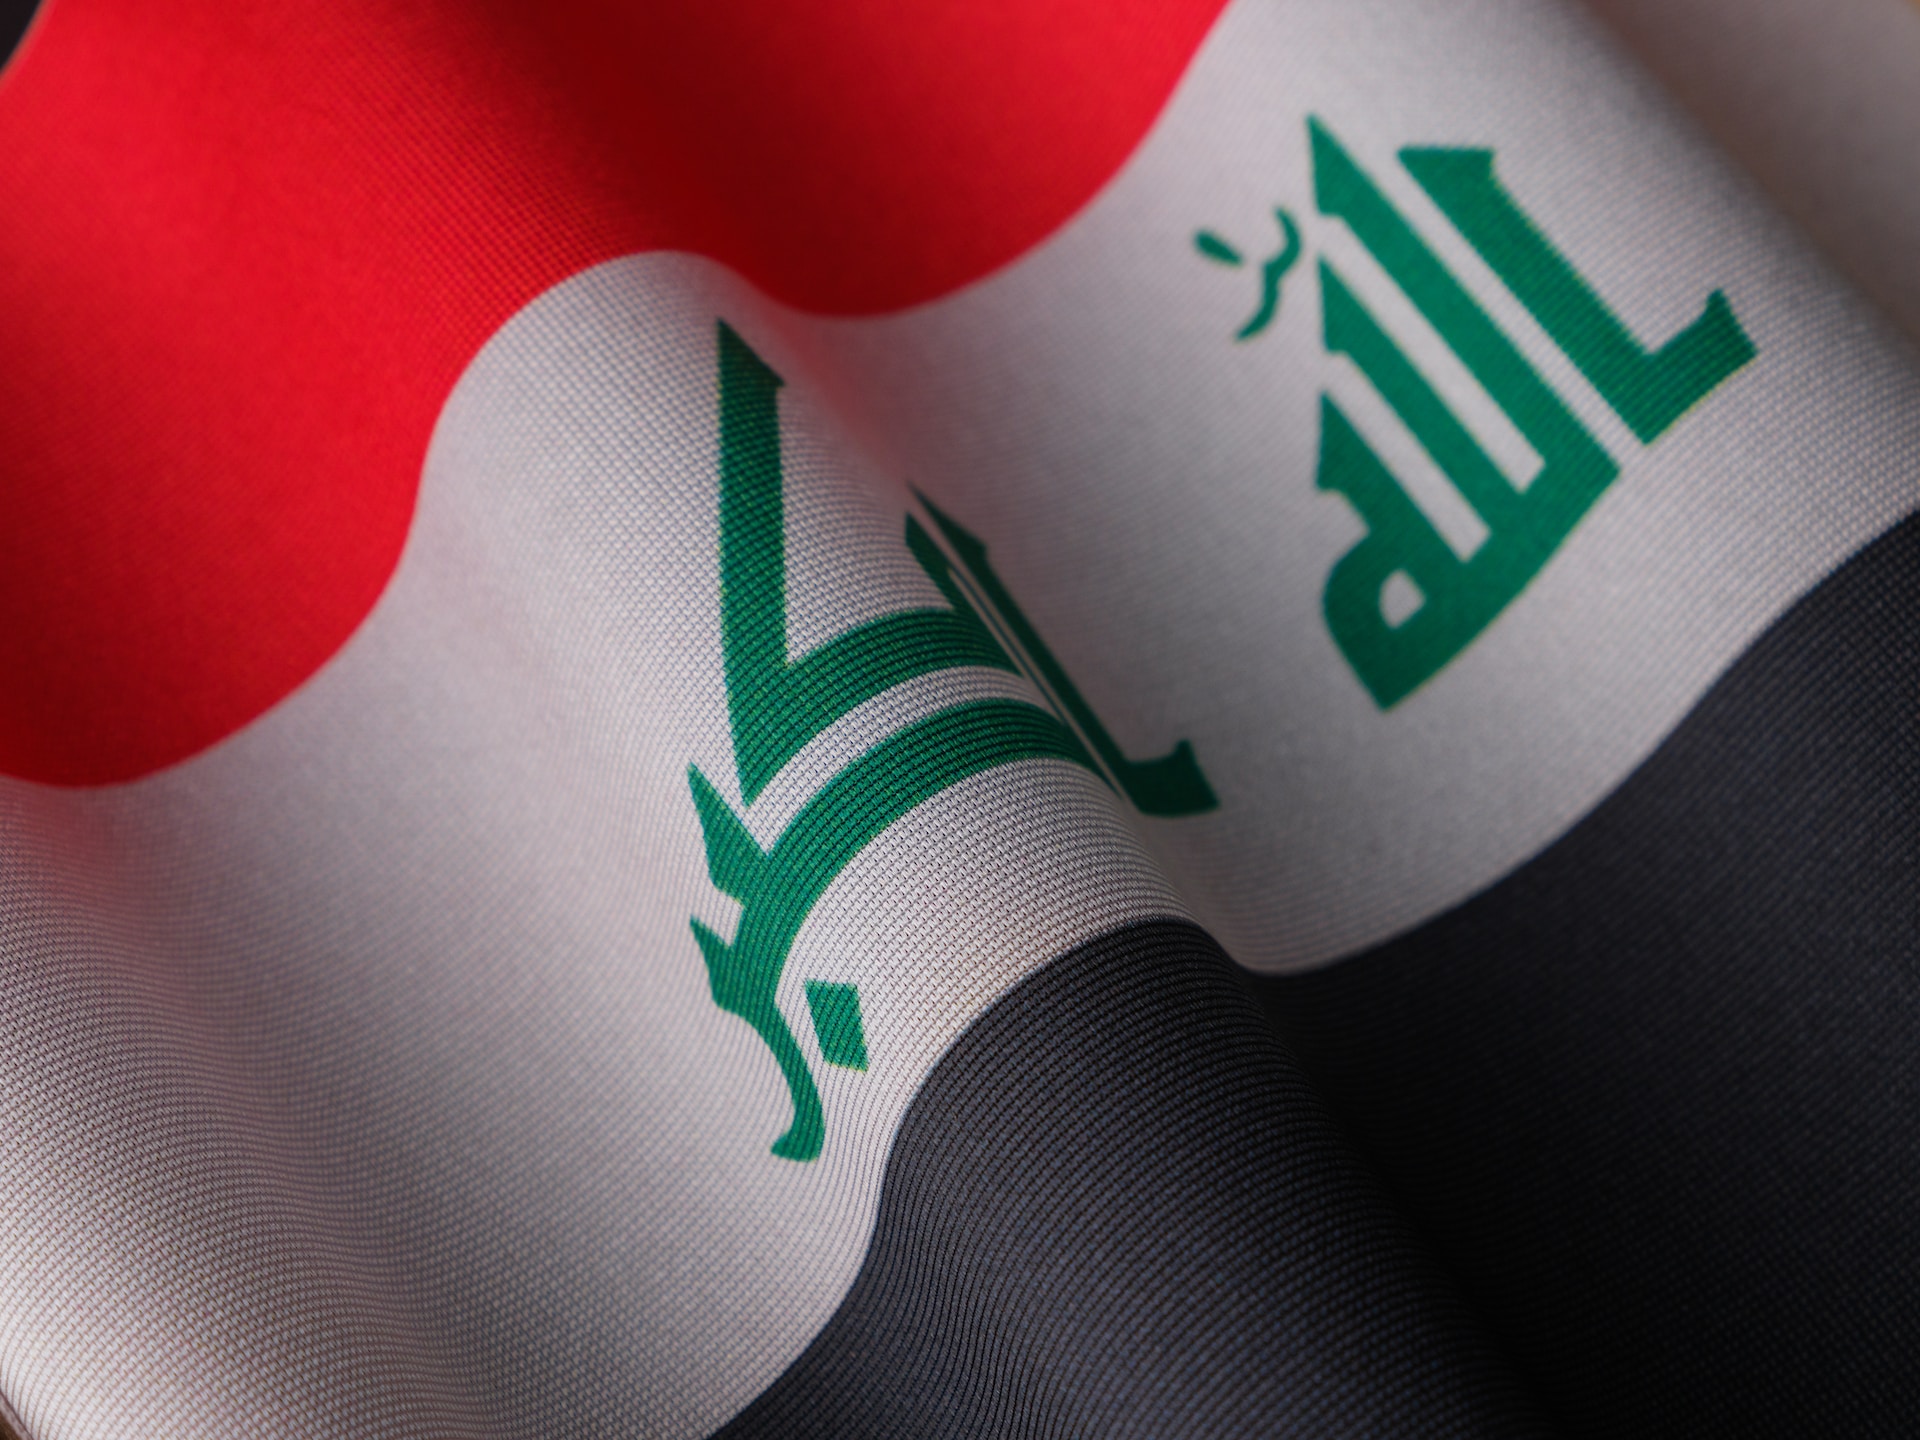 Employment Rules and Regulations in Iraq